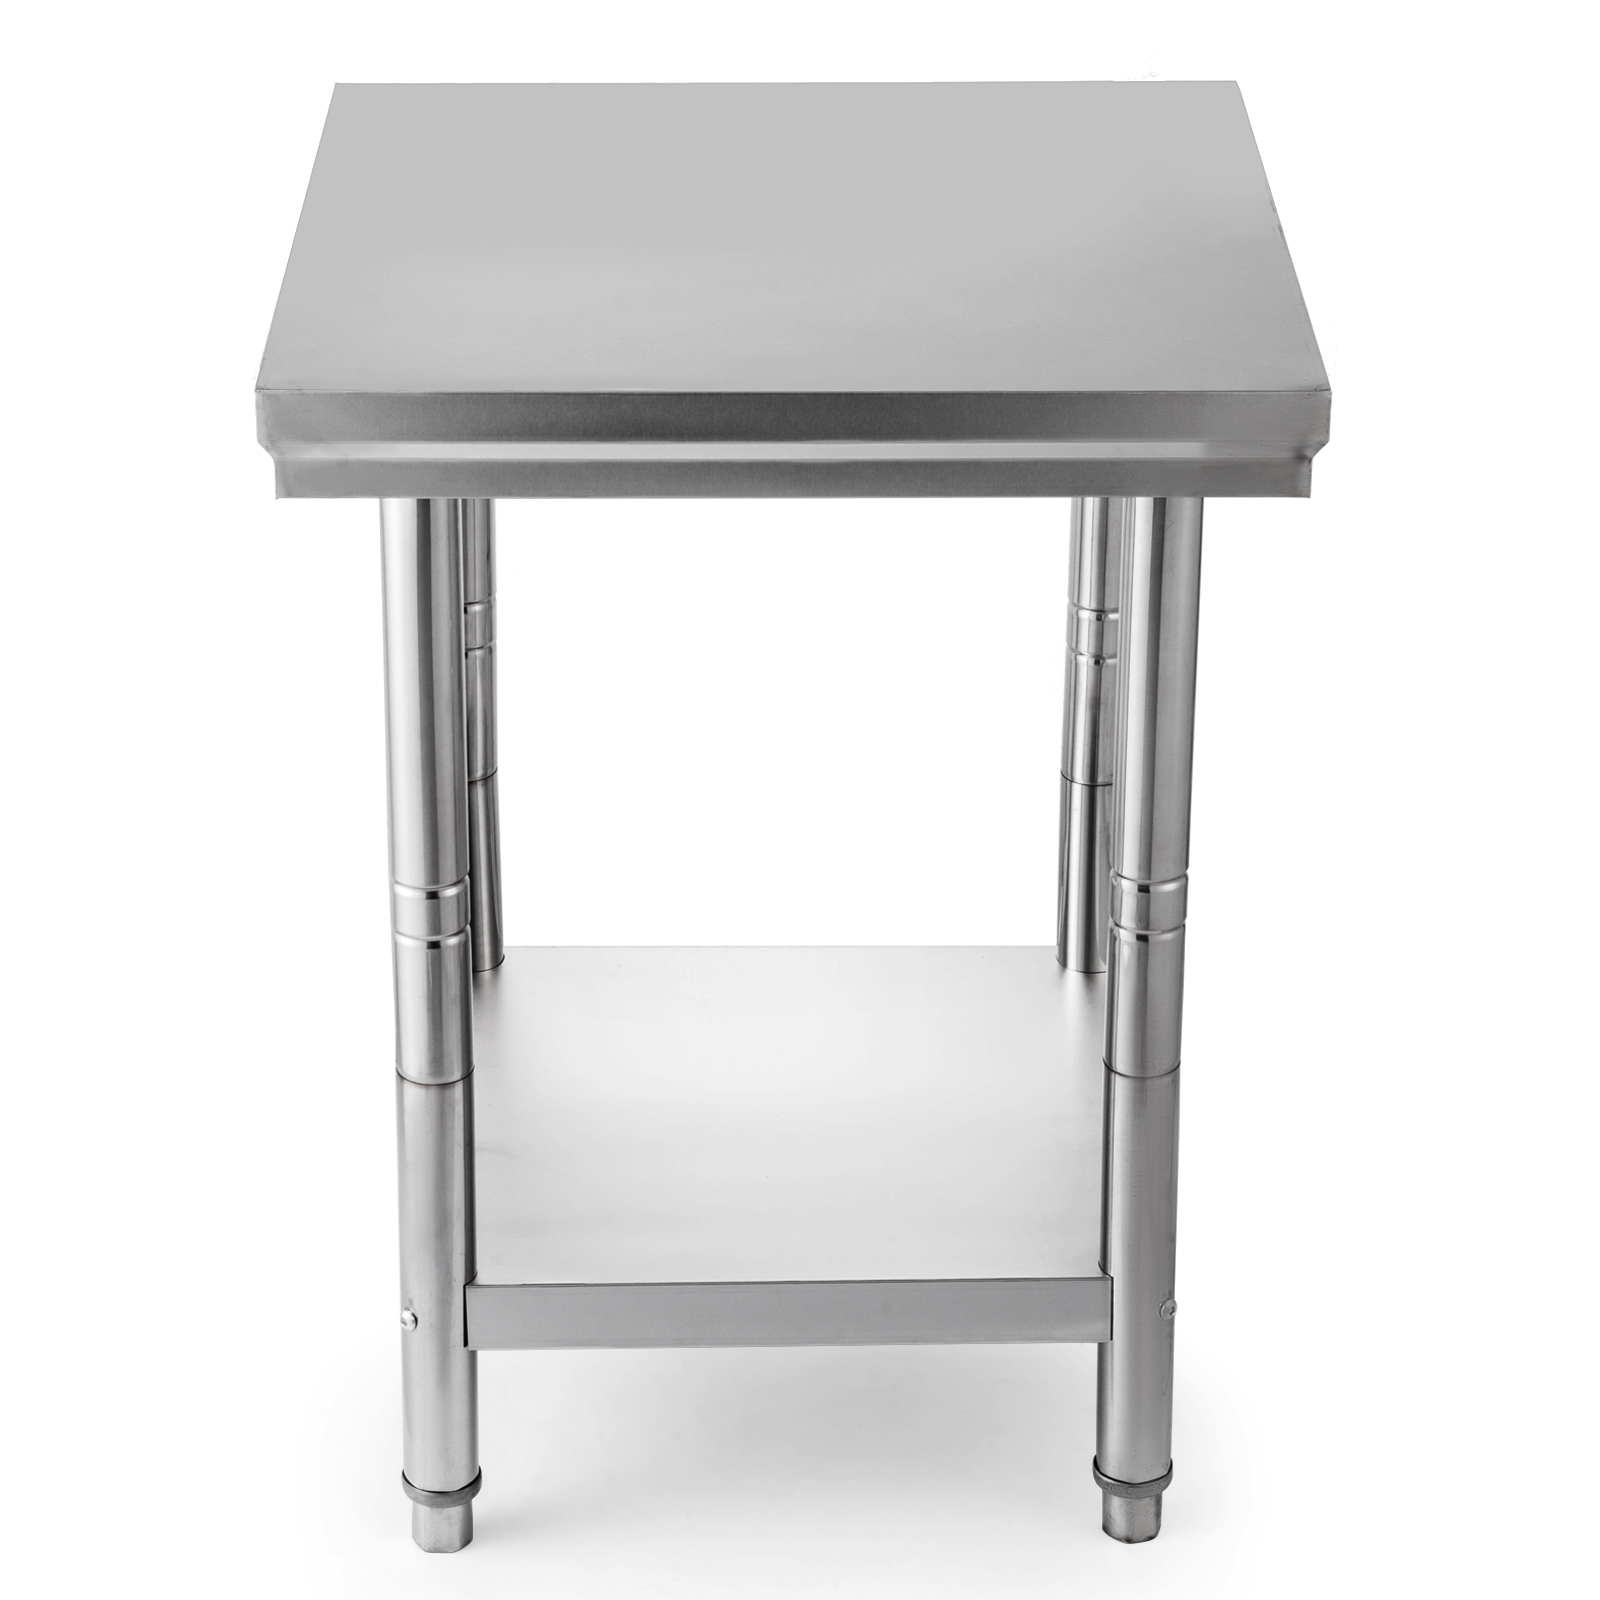 Stainless Steel Commercial Catering Table Work Bench 